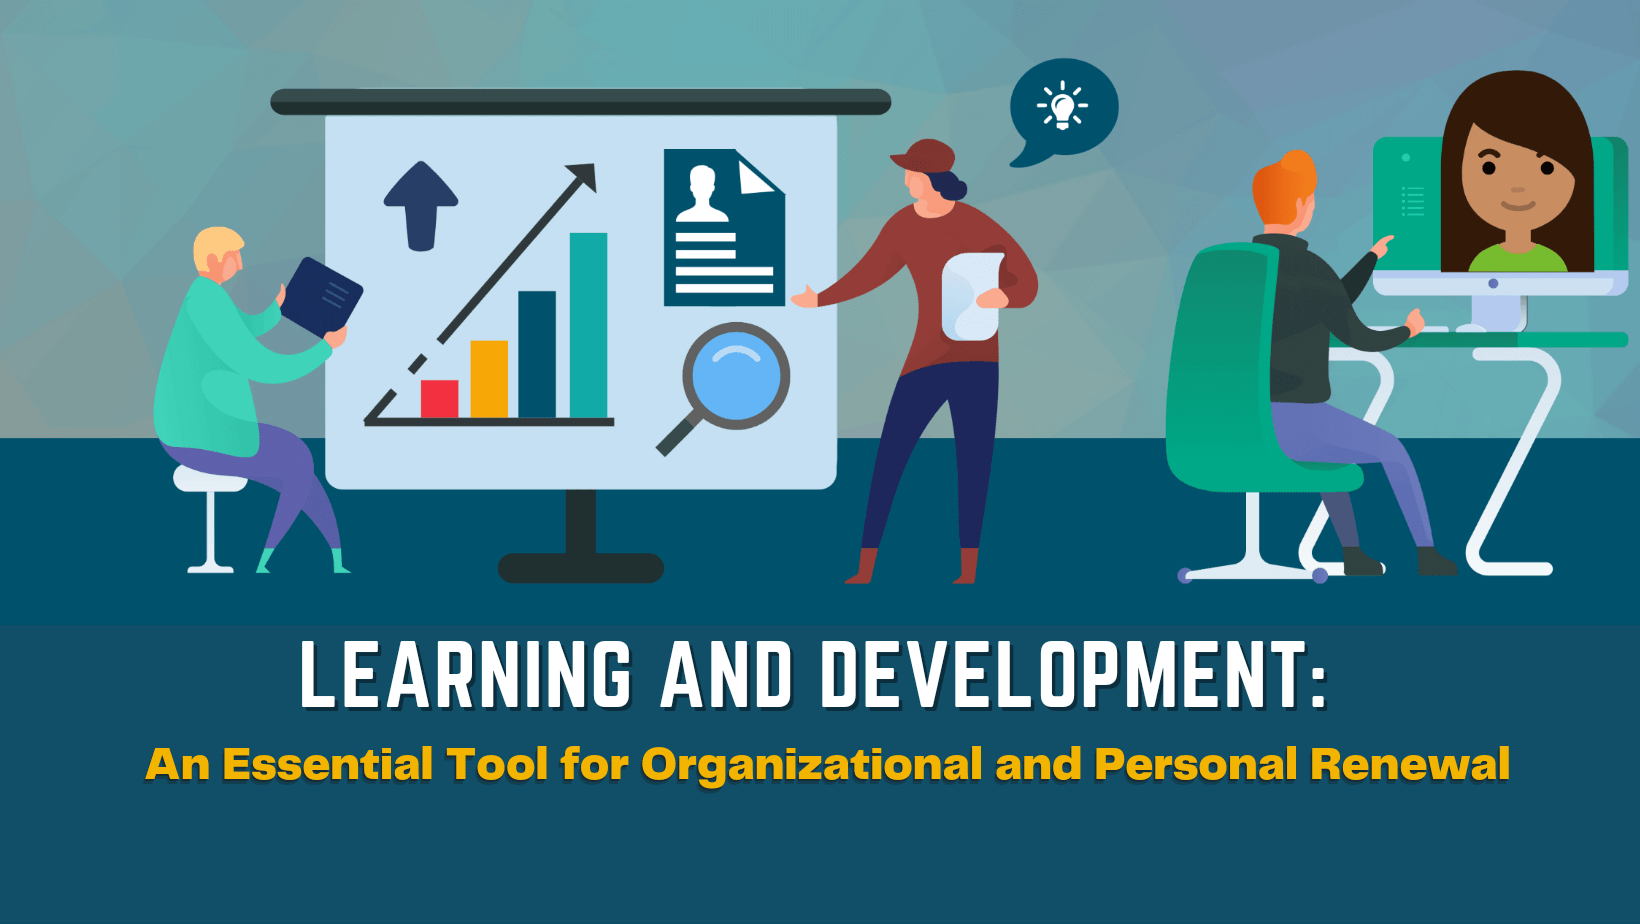 Learning and Development - An Essential Tool for Organizational and Personal Renewal